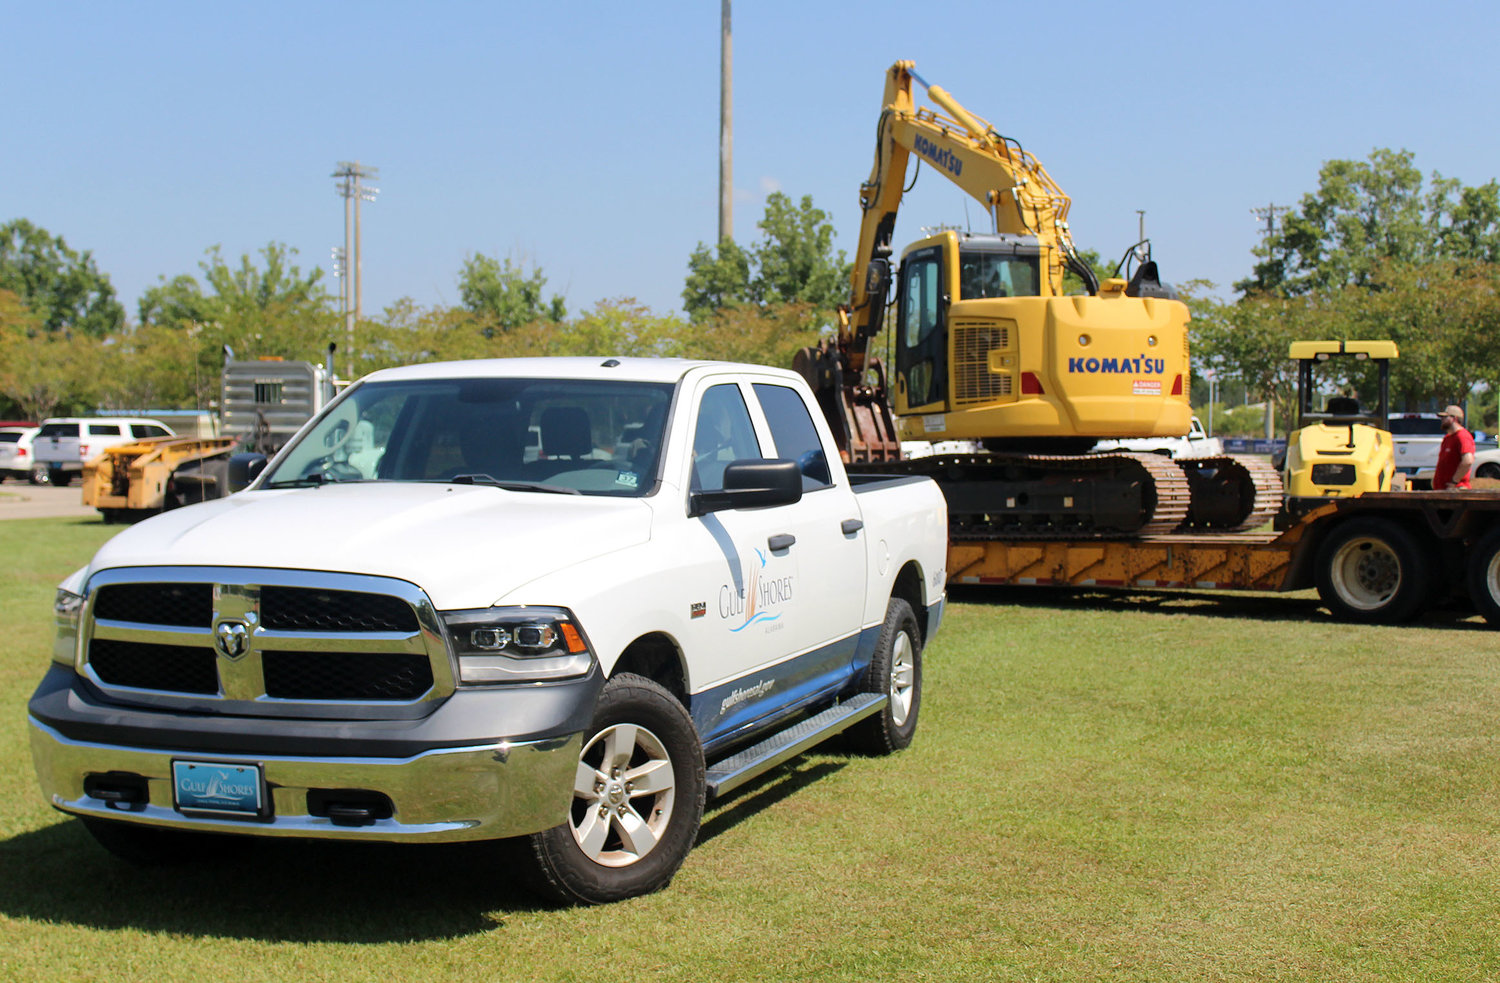 Construction crews wasted no time after the groundbreaking ceremony and got to work on the construction of 12 pickleball courts next to Mickey Miller Blackwell Stadium at the Gulf Shores Sportsplex last Wednesday, June 22.